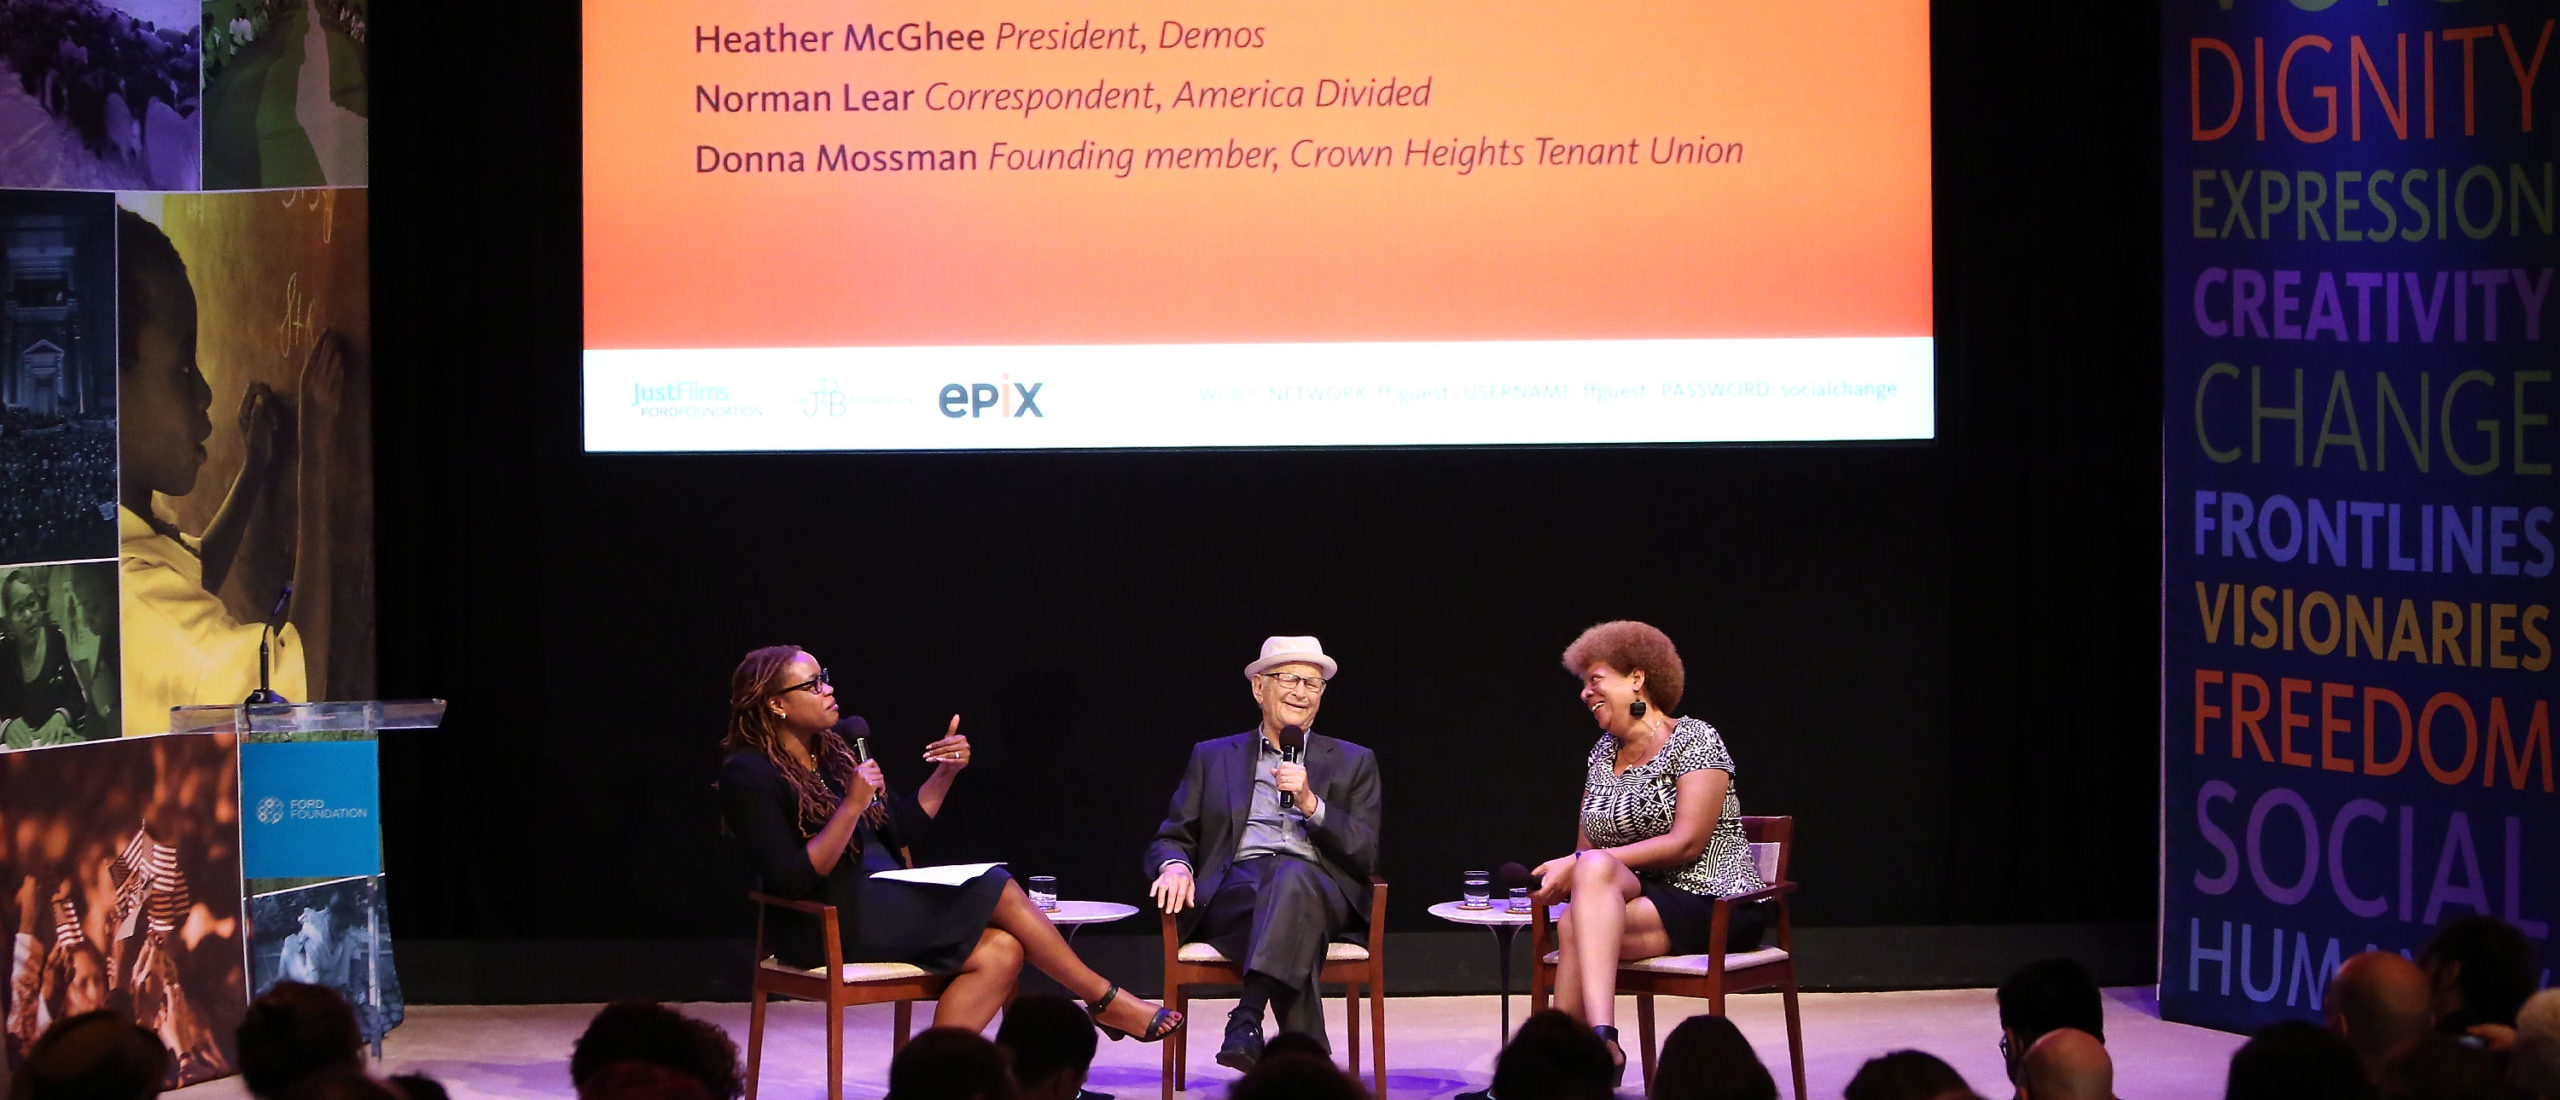 (L-R) President at Demos Heather McGhee, America Divided executive producer and correspondent Norman Lear and founding member of the Crown Heights Tenant Union Donna Mossman, speak at the America Divided EPIX & Ford Foundation Event With Norman Lear & Peter Sarsgaard at Ford Foundation on September 13, 2016 in New York City. (Photo by Monica Schipper/Getty Images for EPIX)